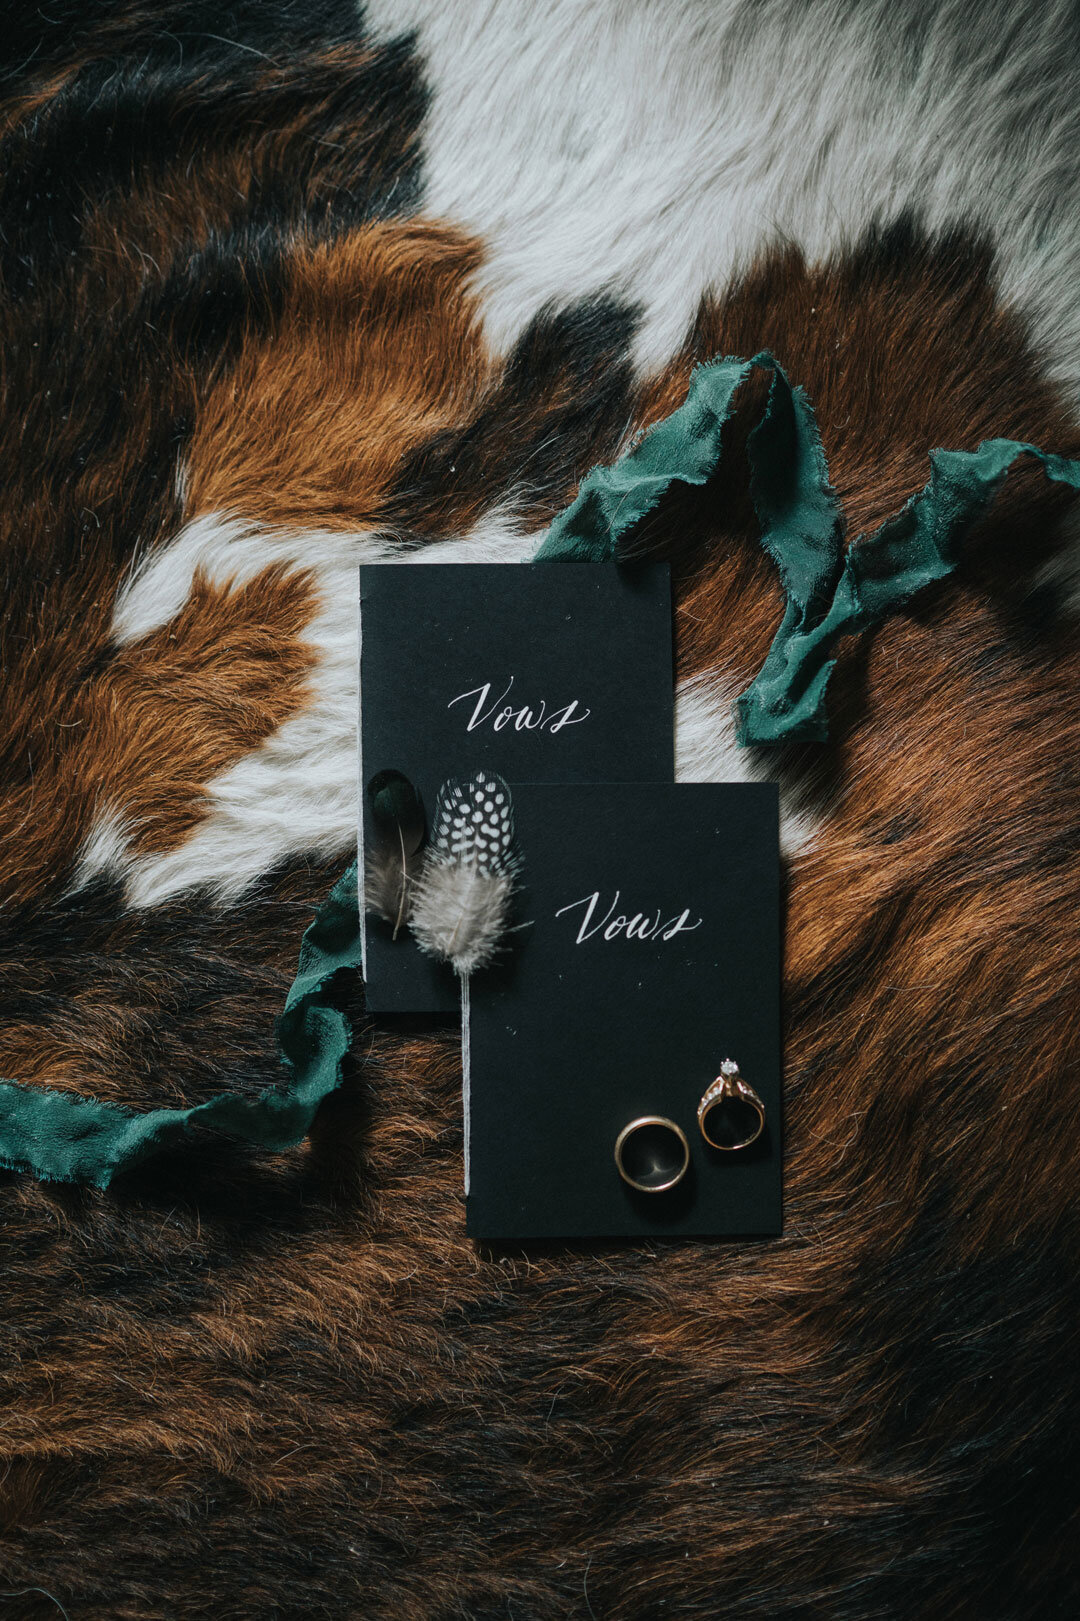 Black vow books with rings and a feather